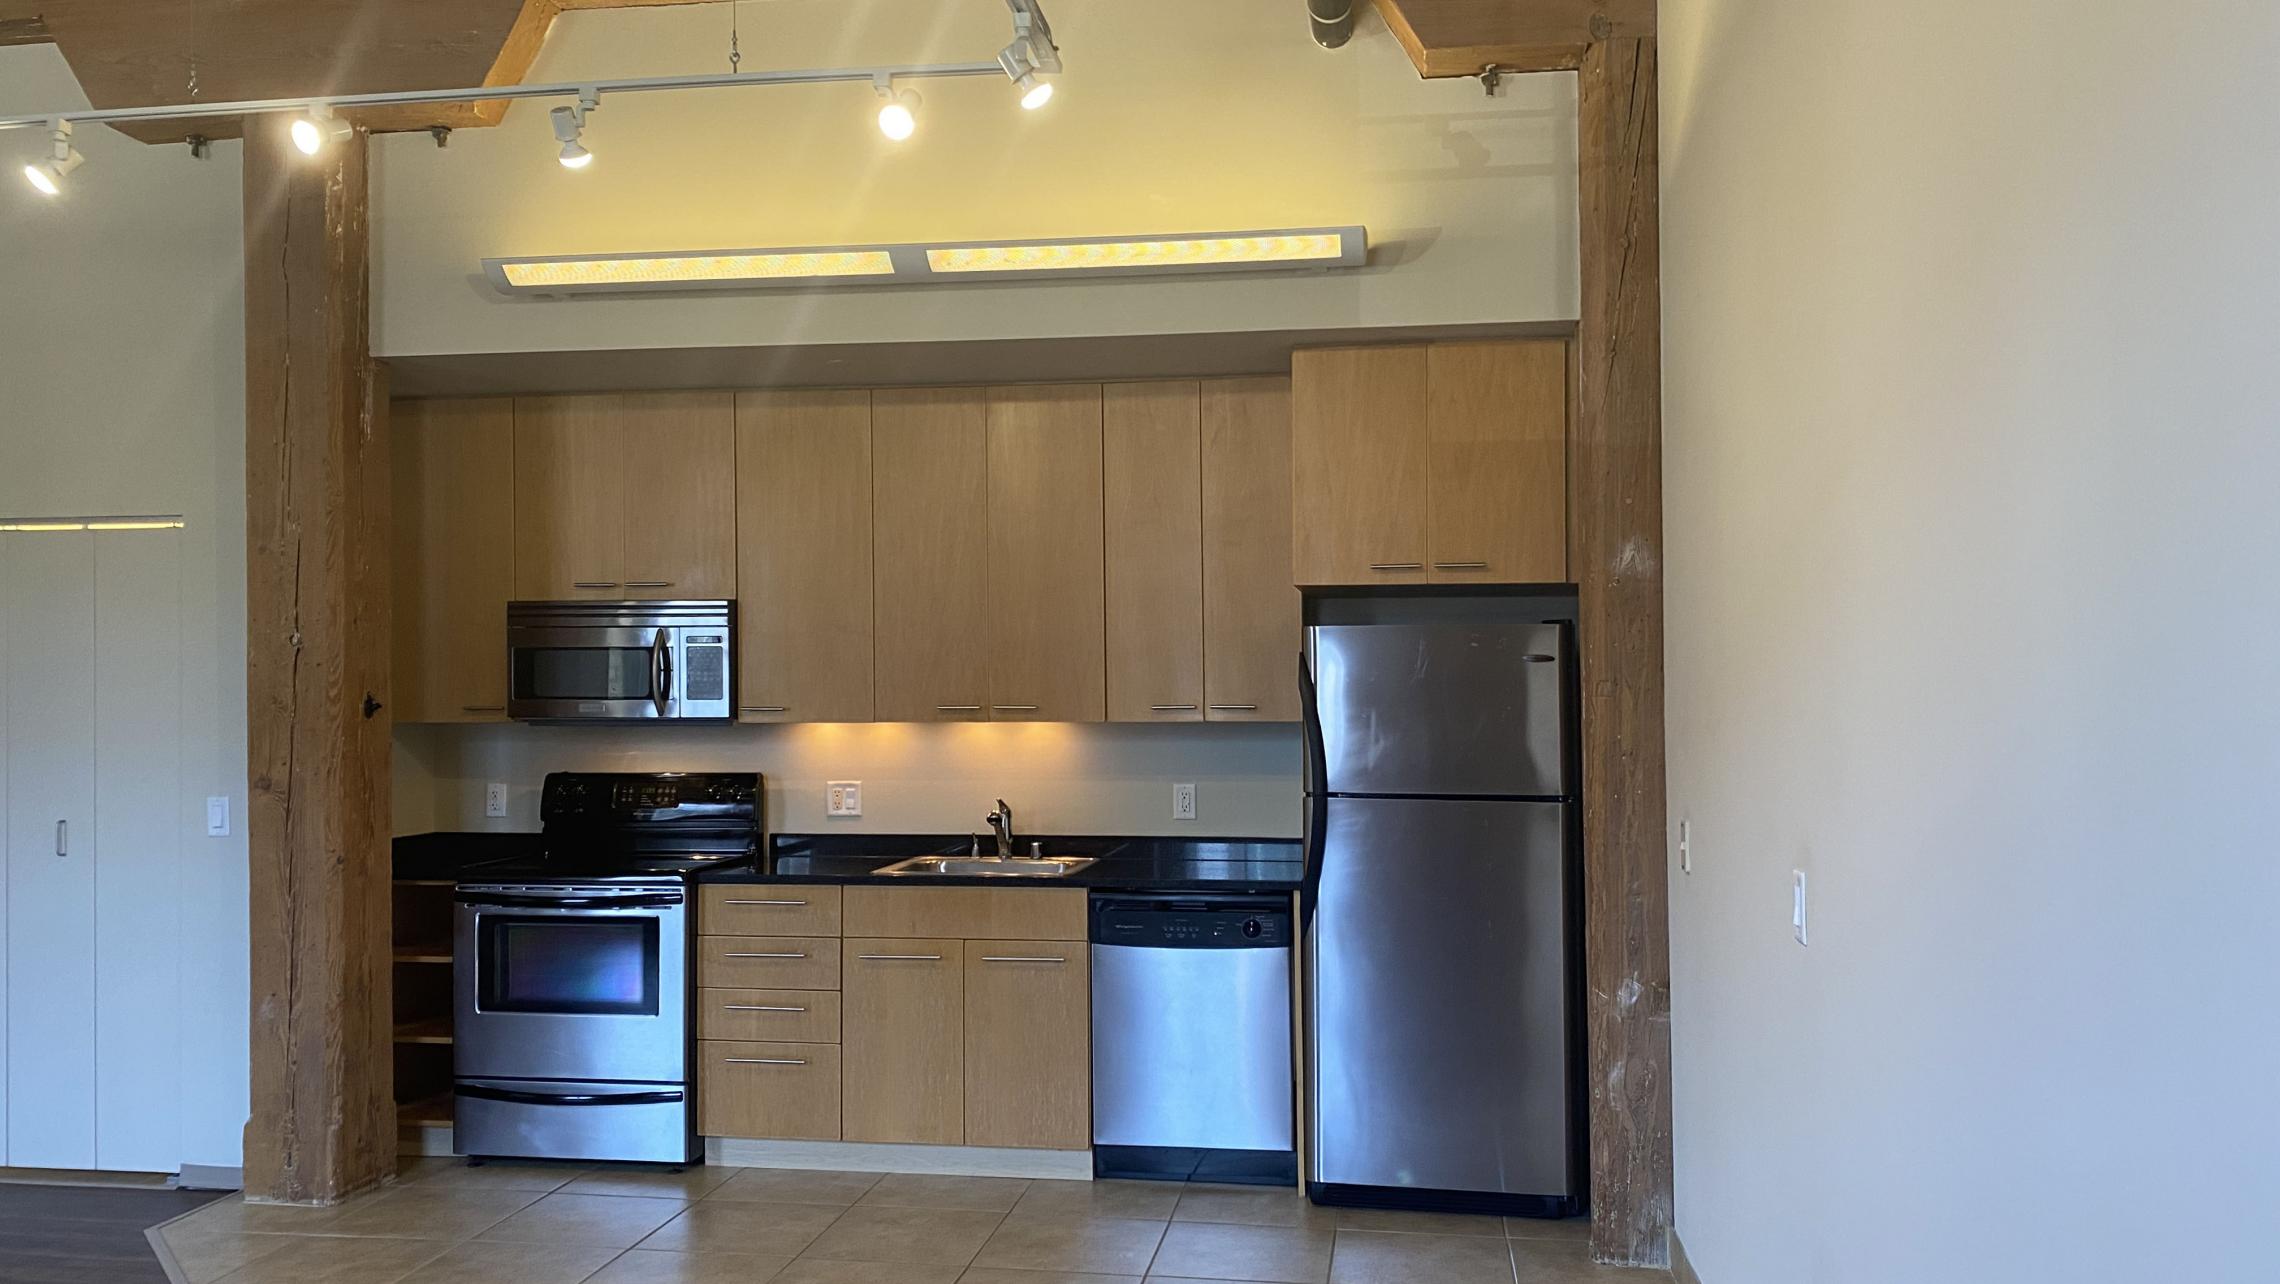 Tobacco-Lofts-Yards-Apartment-E211-One-Bedroom-Historic-Exposed-Brick-Timber-Beams-High-Ceilings-Design-Unique-Downtown-Bike-Path-Kitchen-Bathroom-Cats-Fitness-Courtyard-Lounge